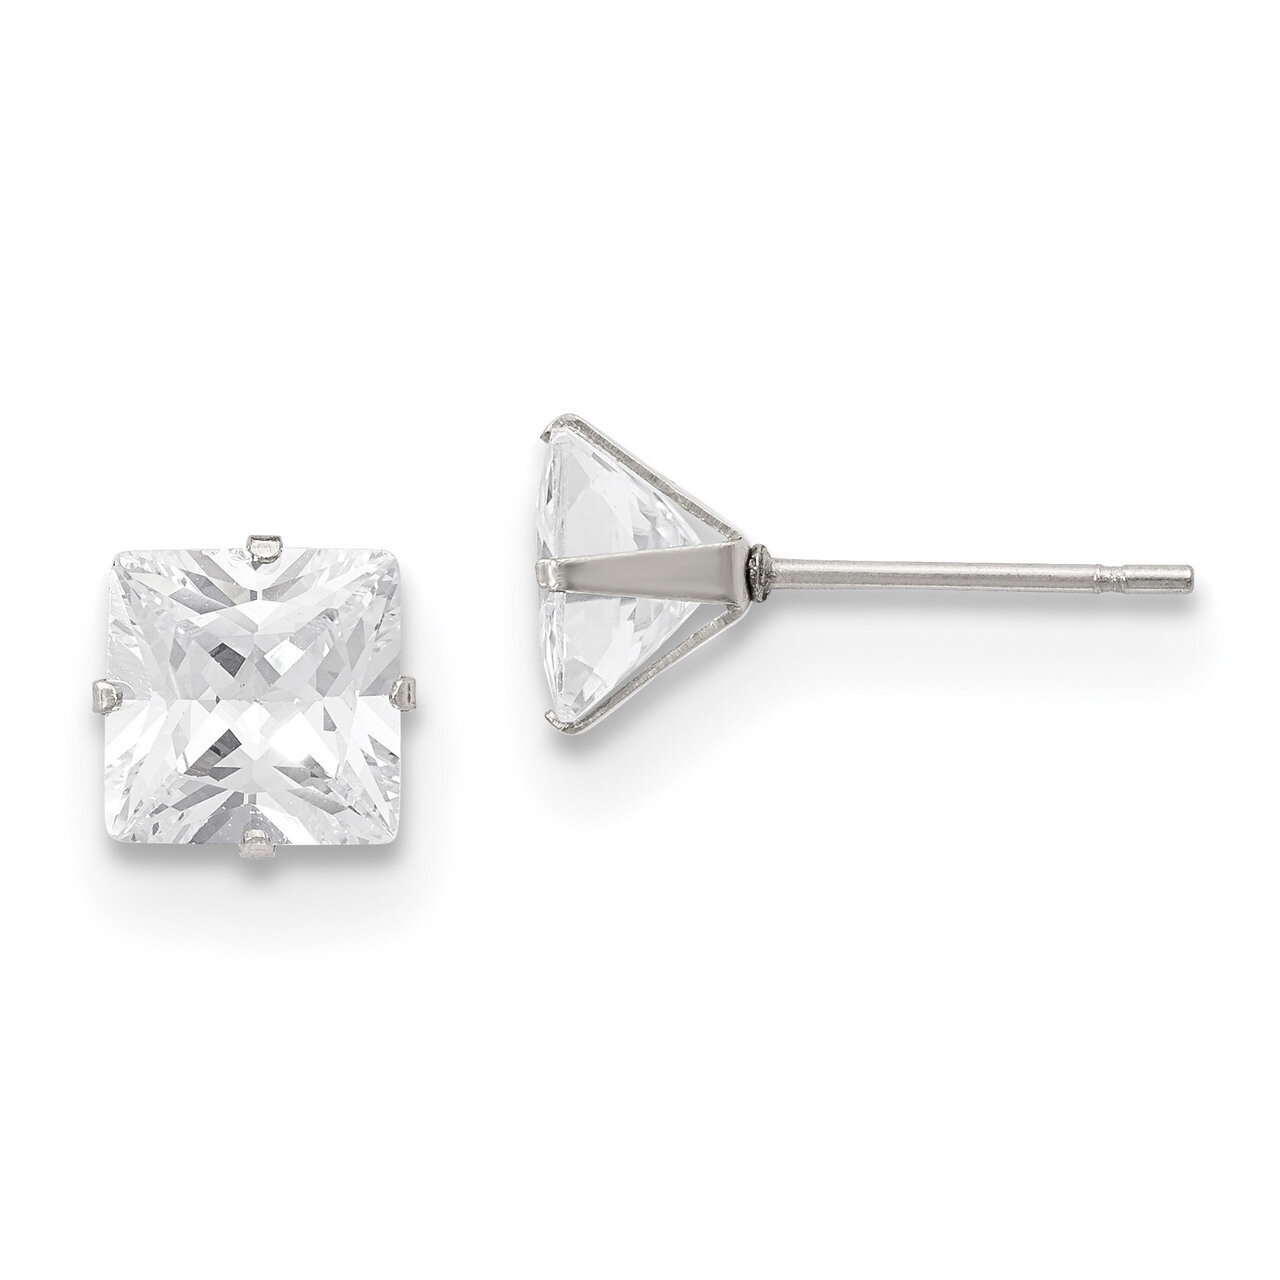 7mm Square Diamond CZ Stud Post Earrings Stainless Steel Polished SRE1103